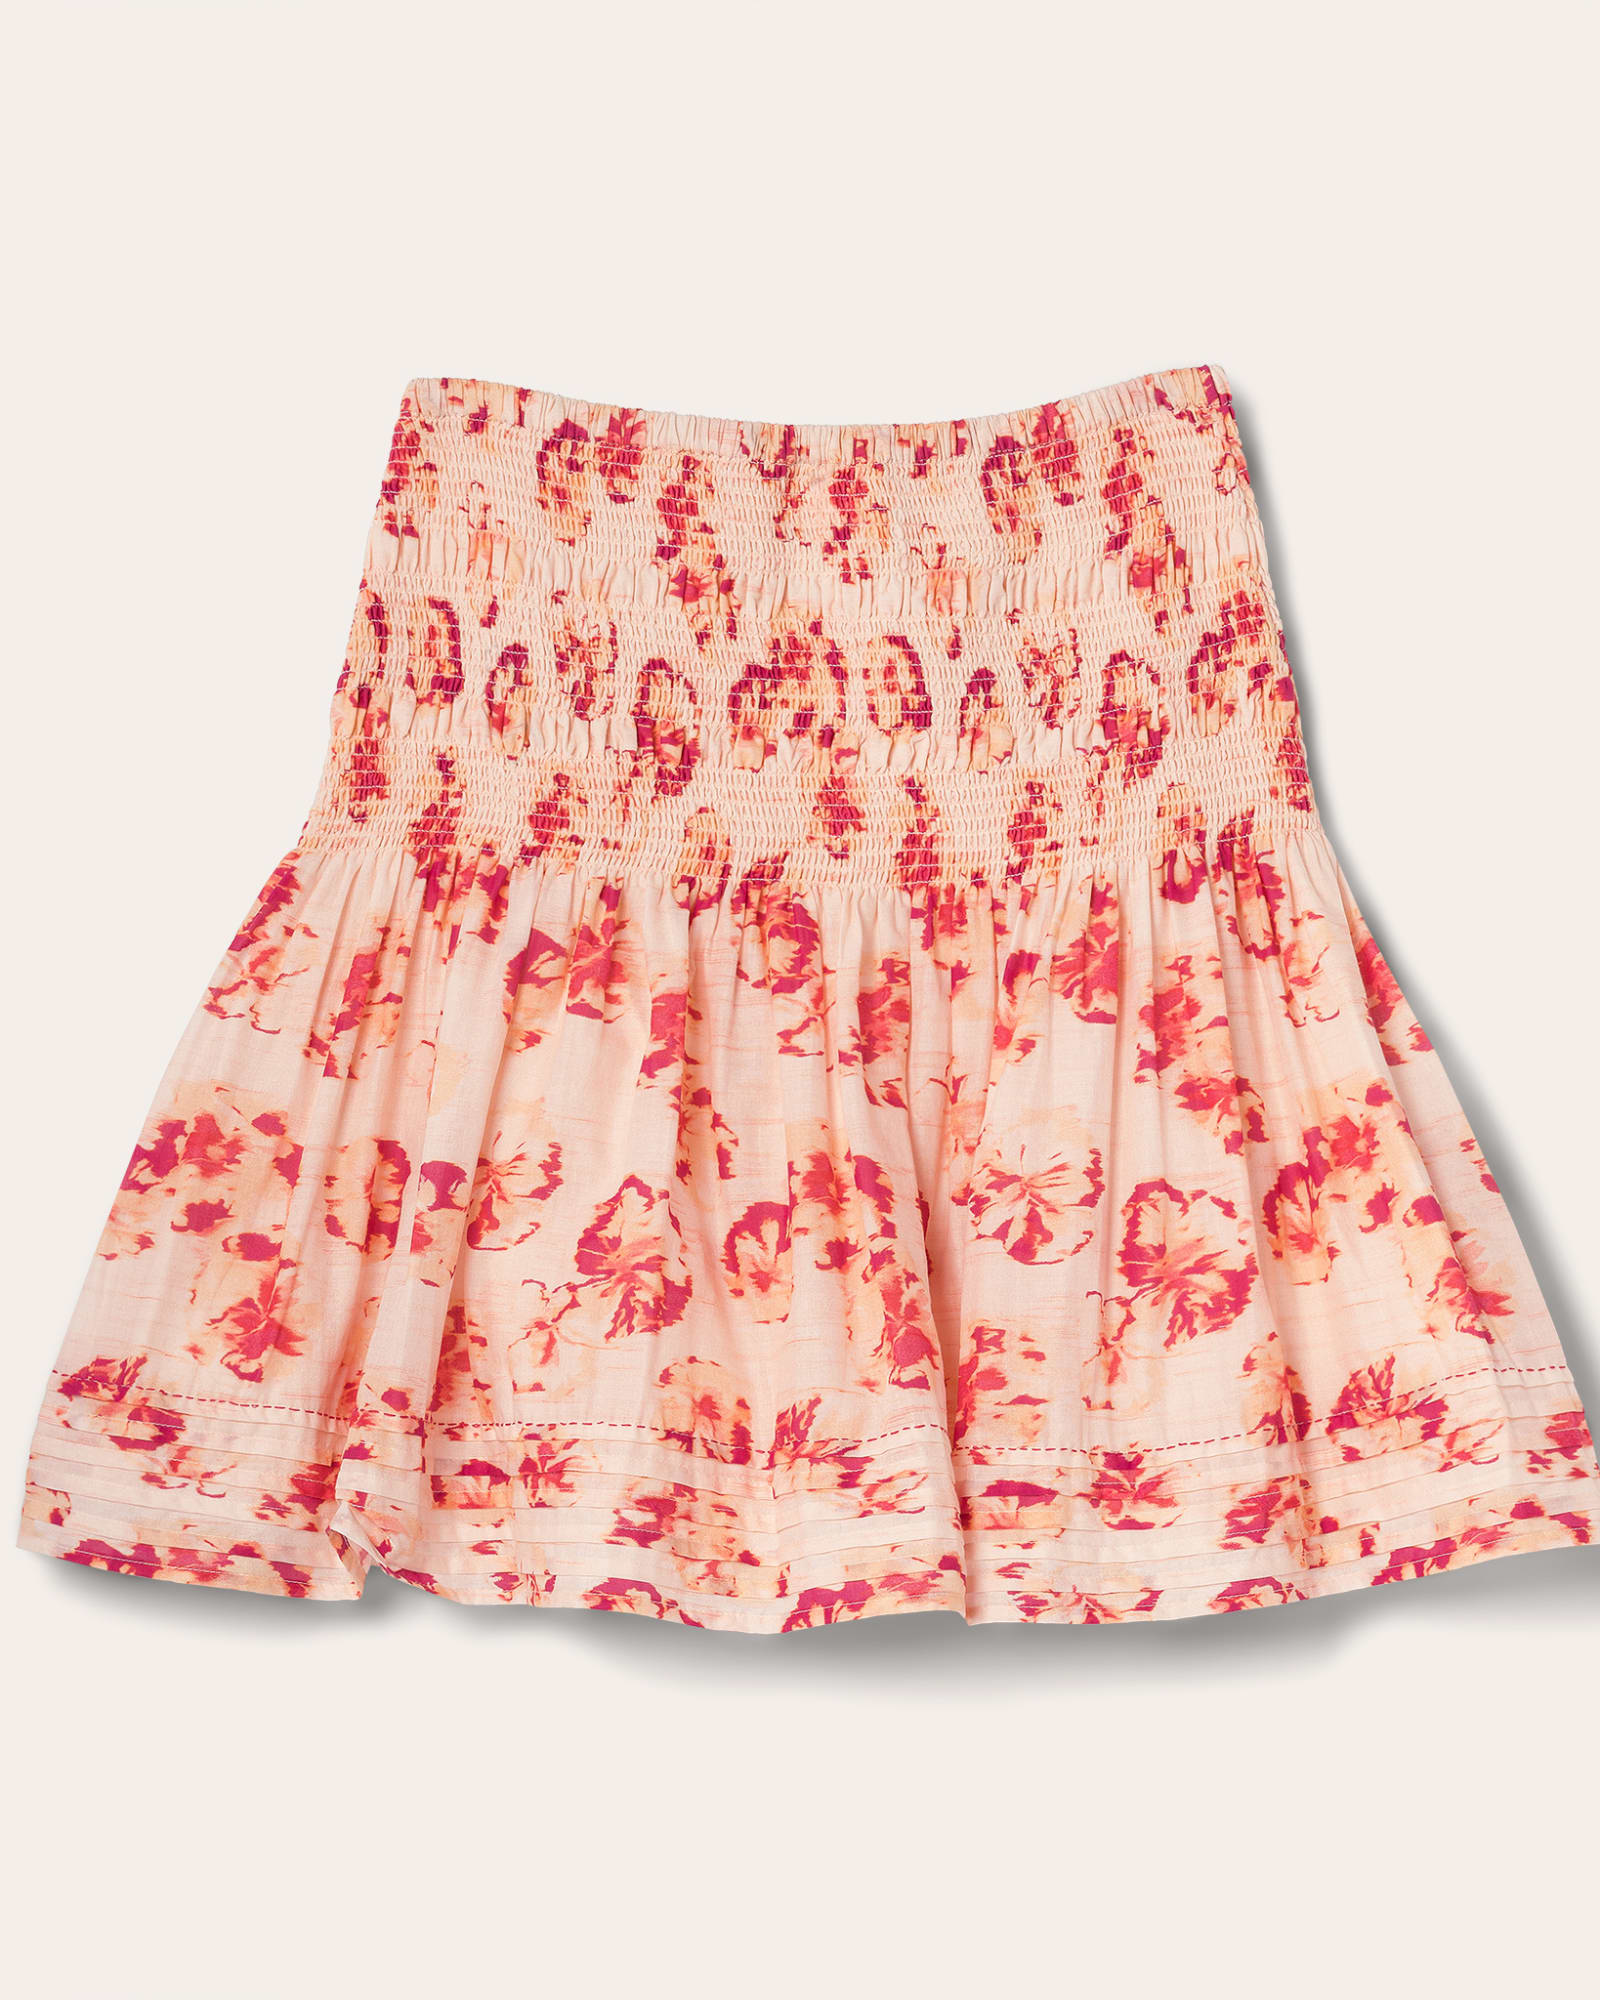 Duras Skirt | Orchid Ikat Floral Print